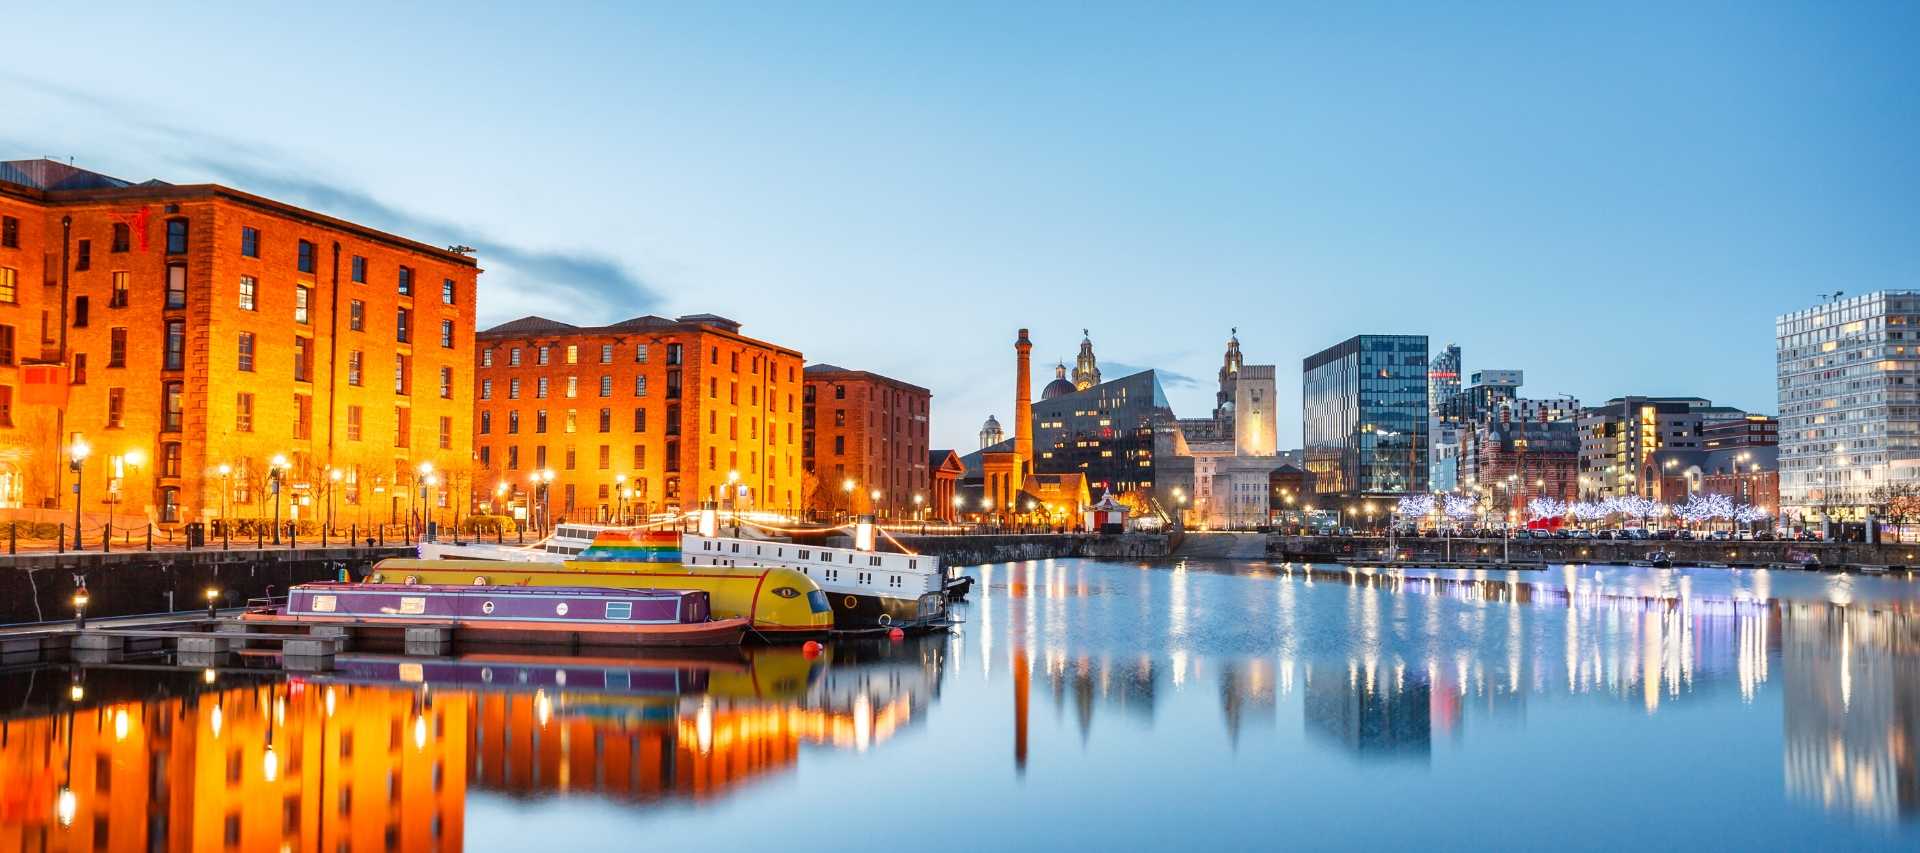 How to Spend the Perfect Weekend in Liverpool